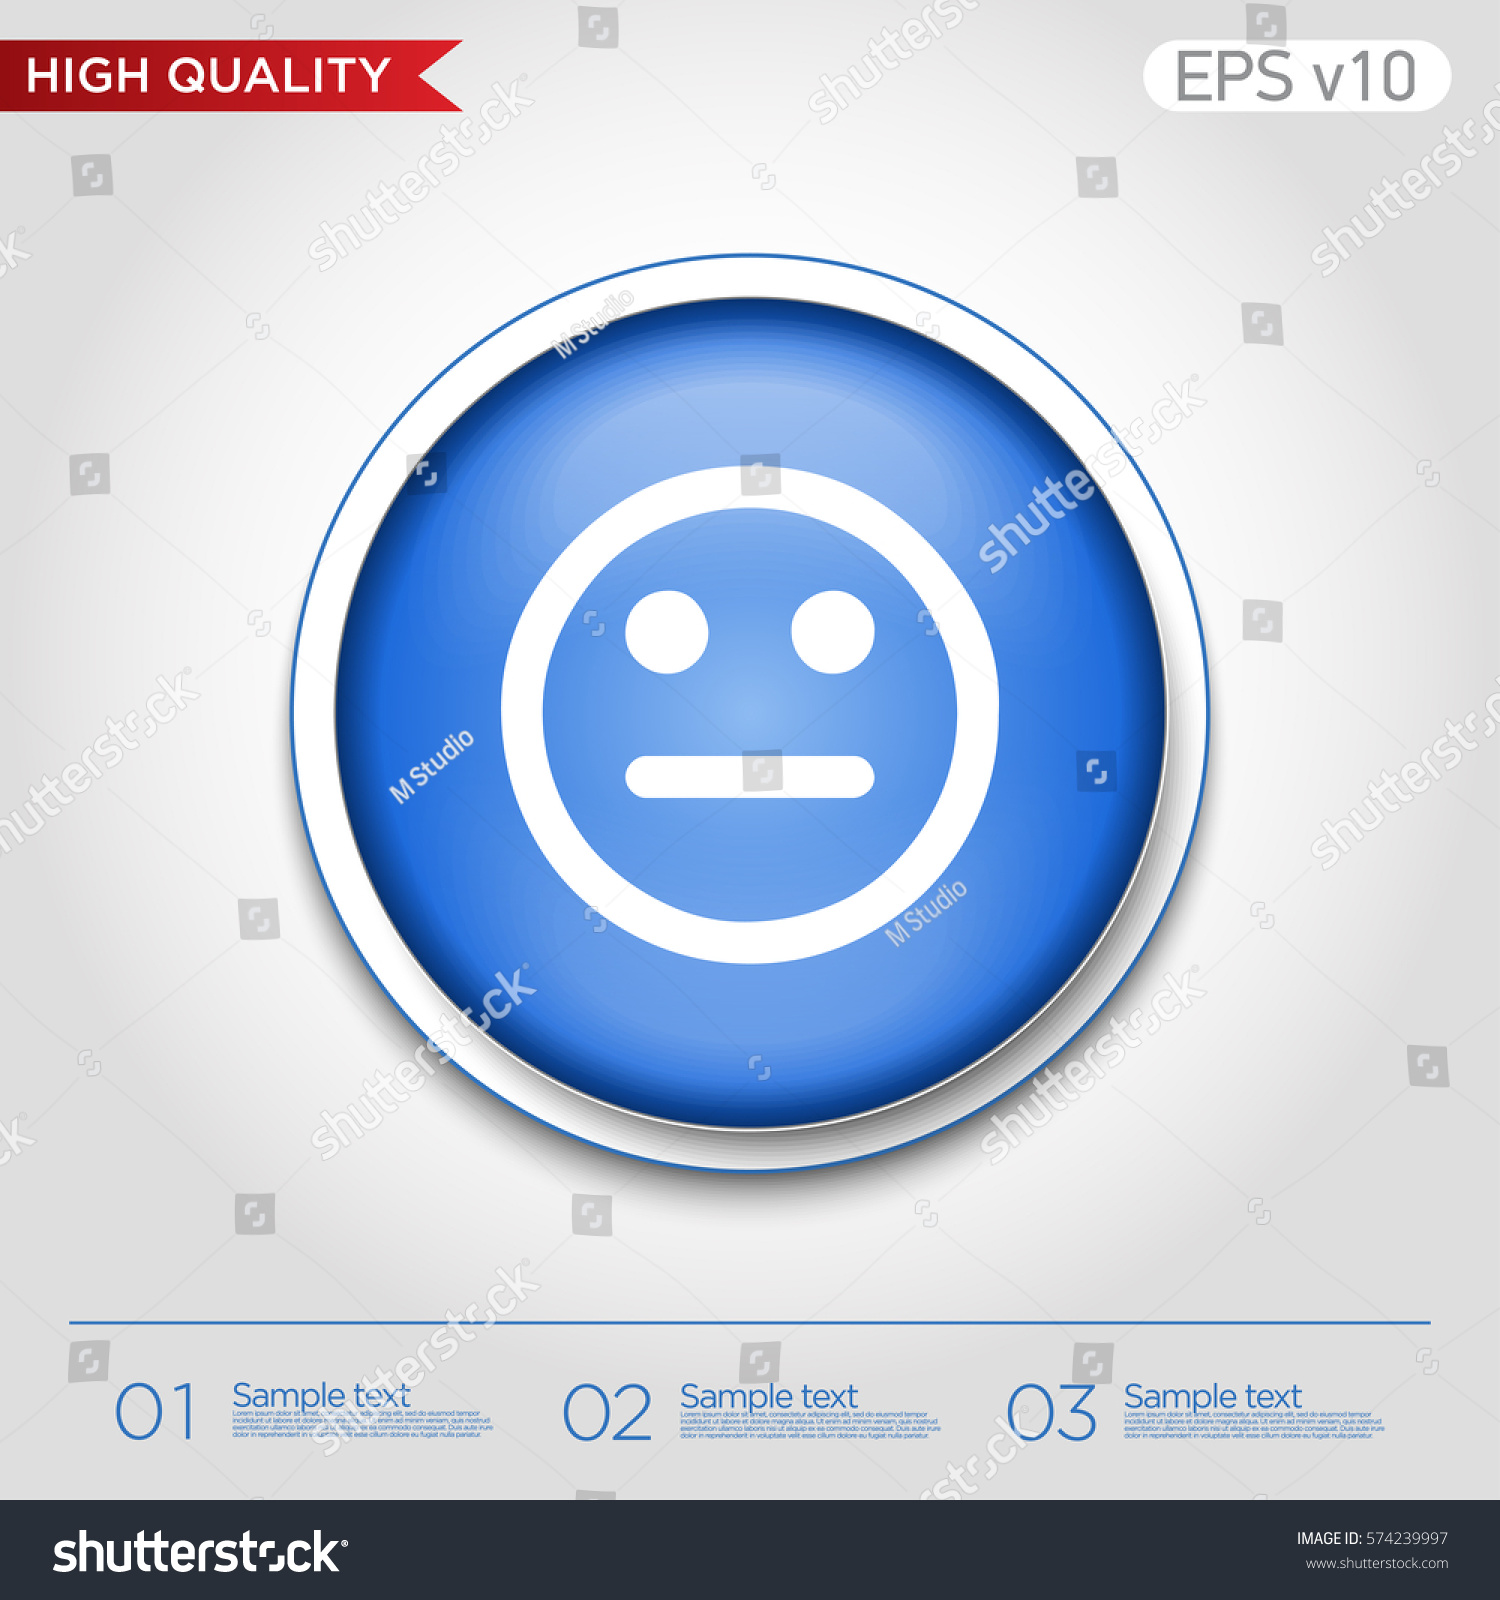 Bad smile icon. Button with bad smile icon. Modern UI vector. #574239997